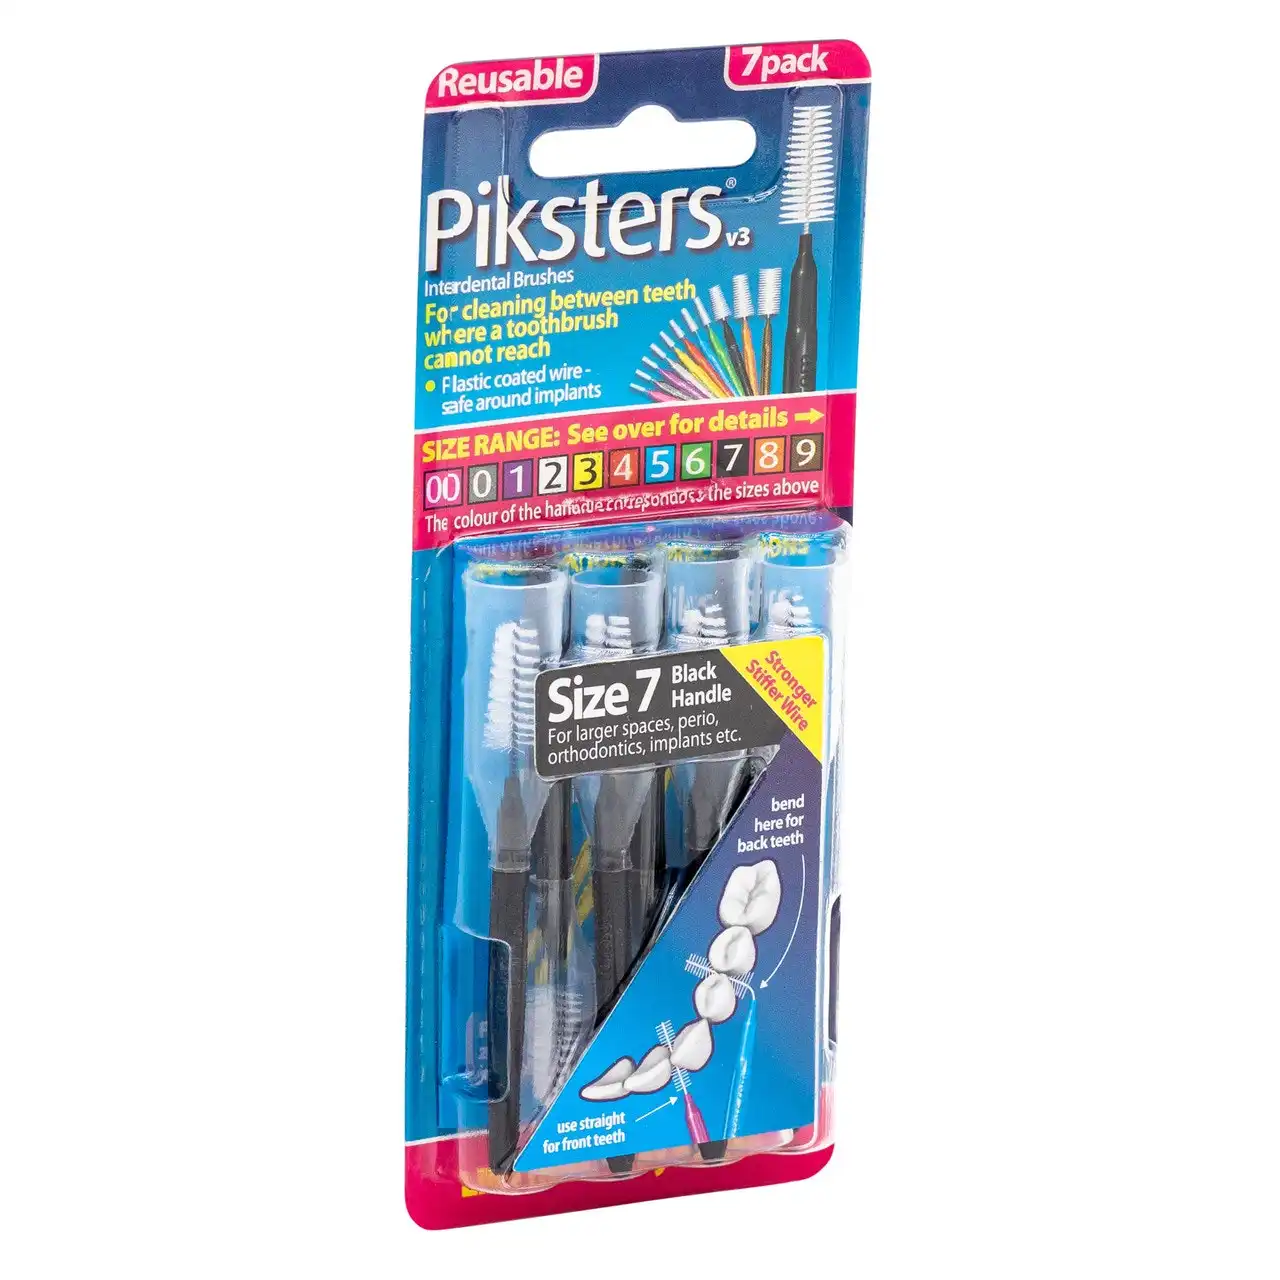 Piksters(R) Interdental Brushes Black Size 7 7pk